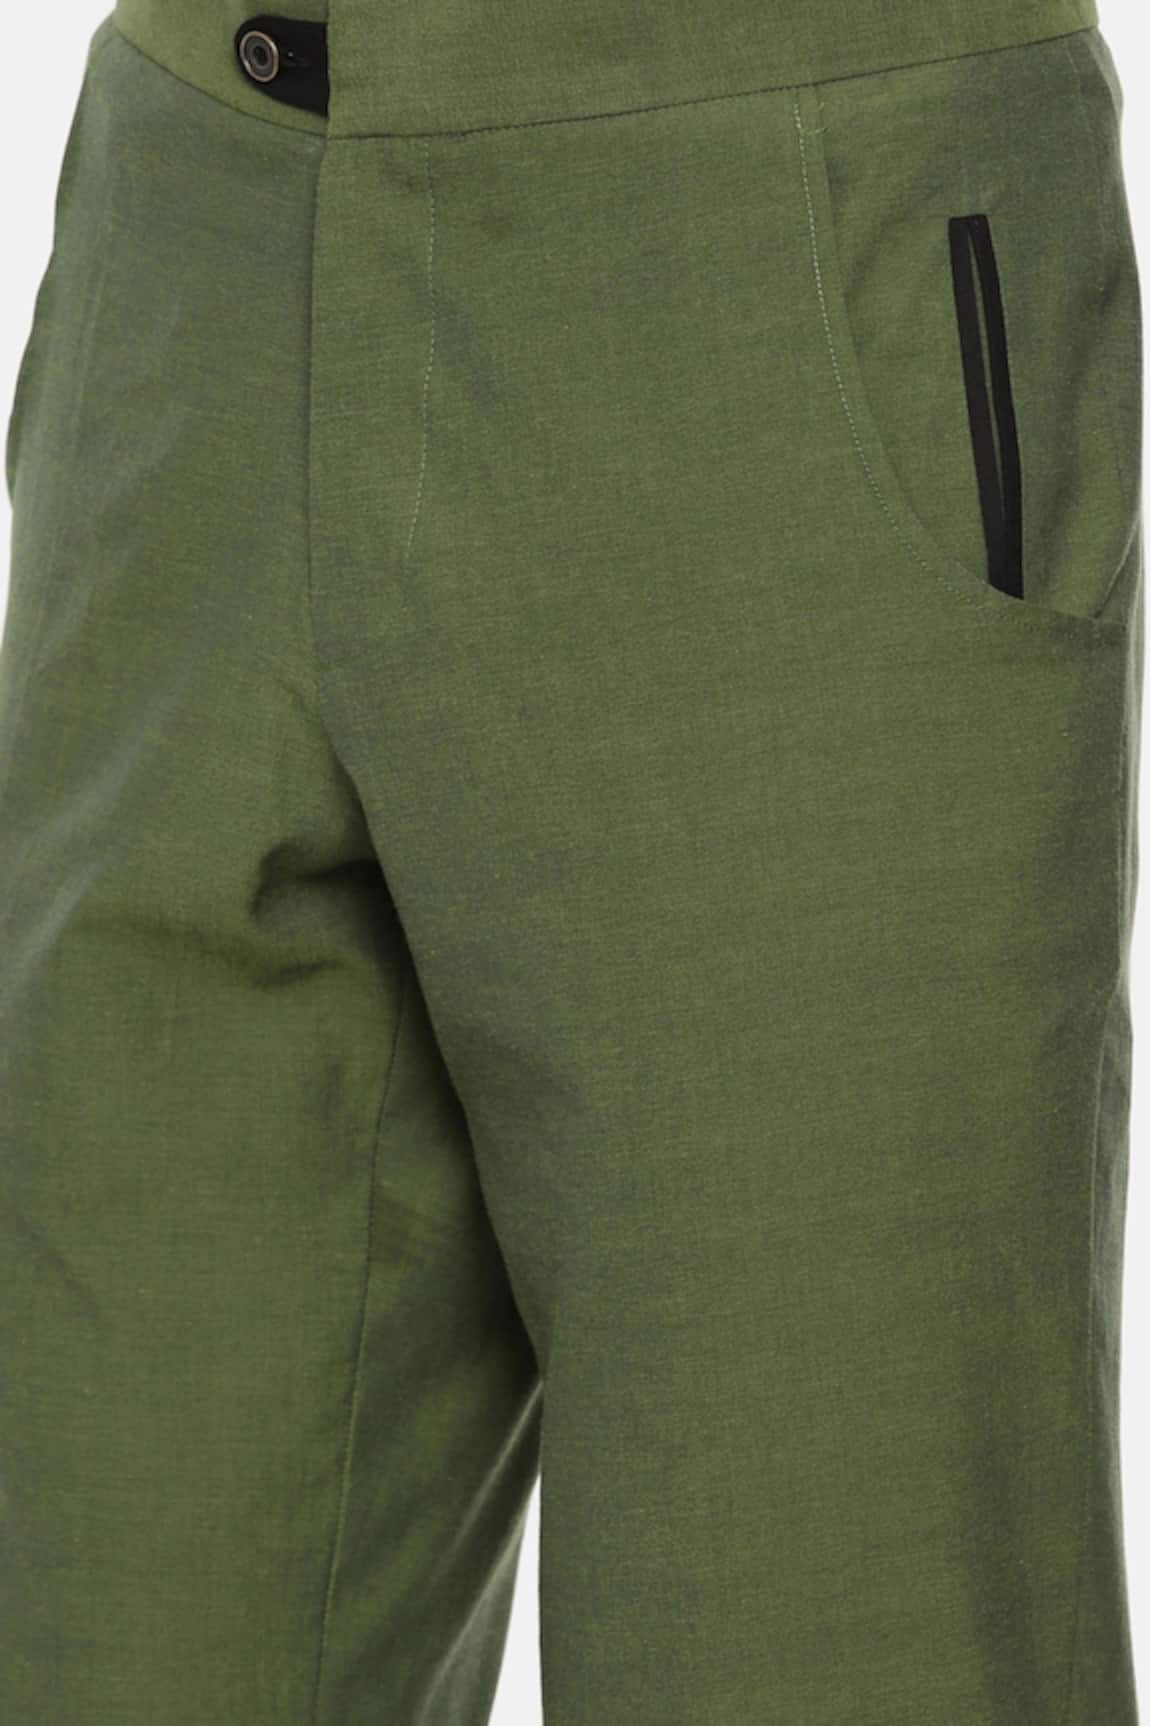 IRK Fashion cotton trouser pants for womenTrousers Olive Beige regular  combo